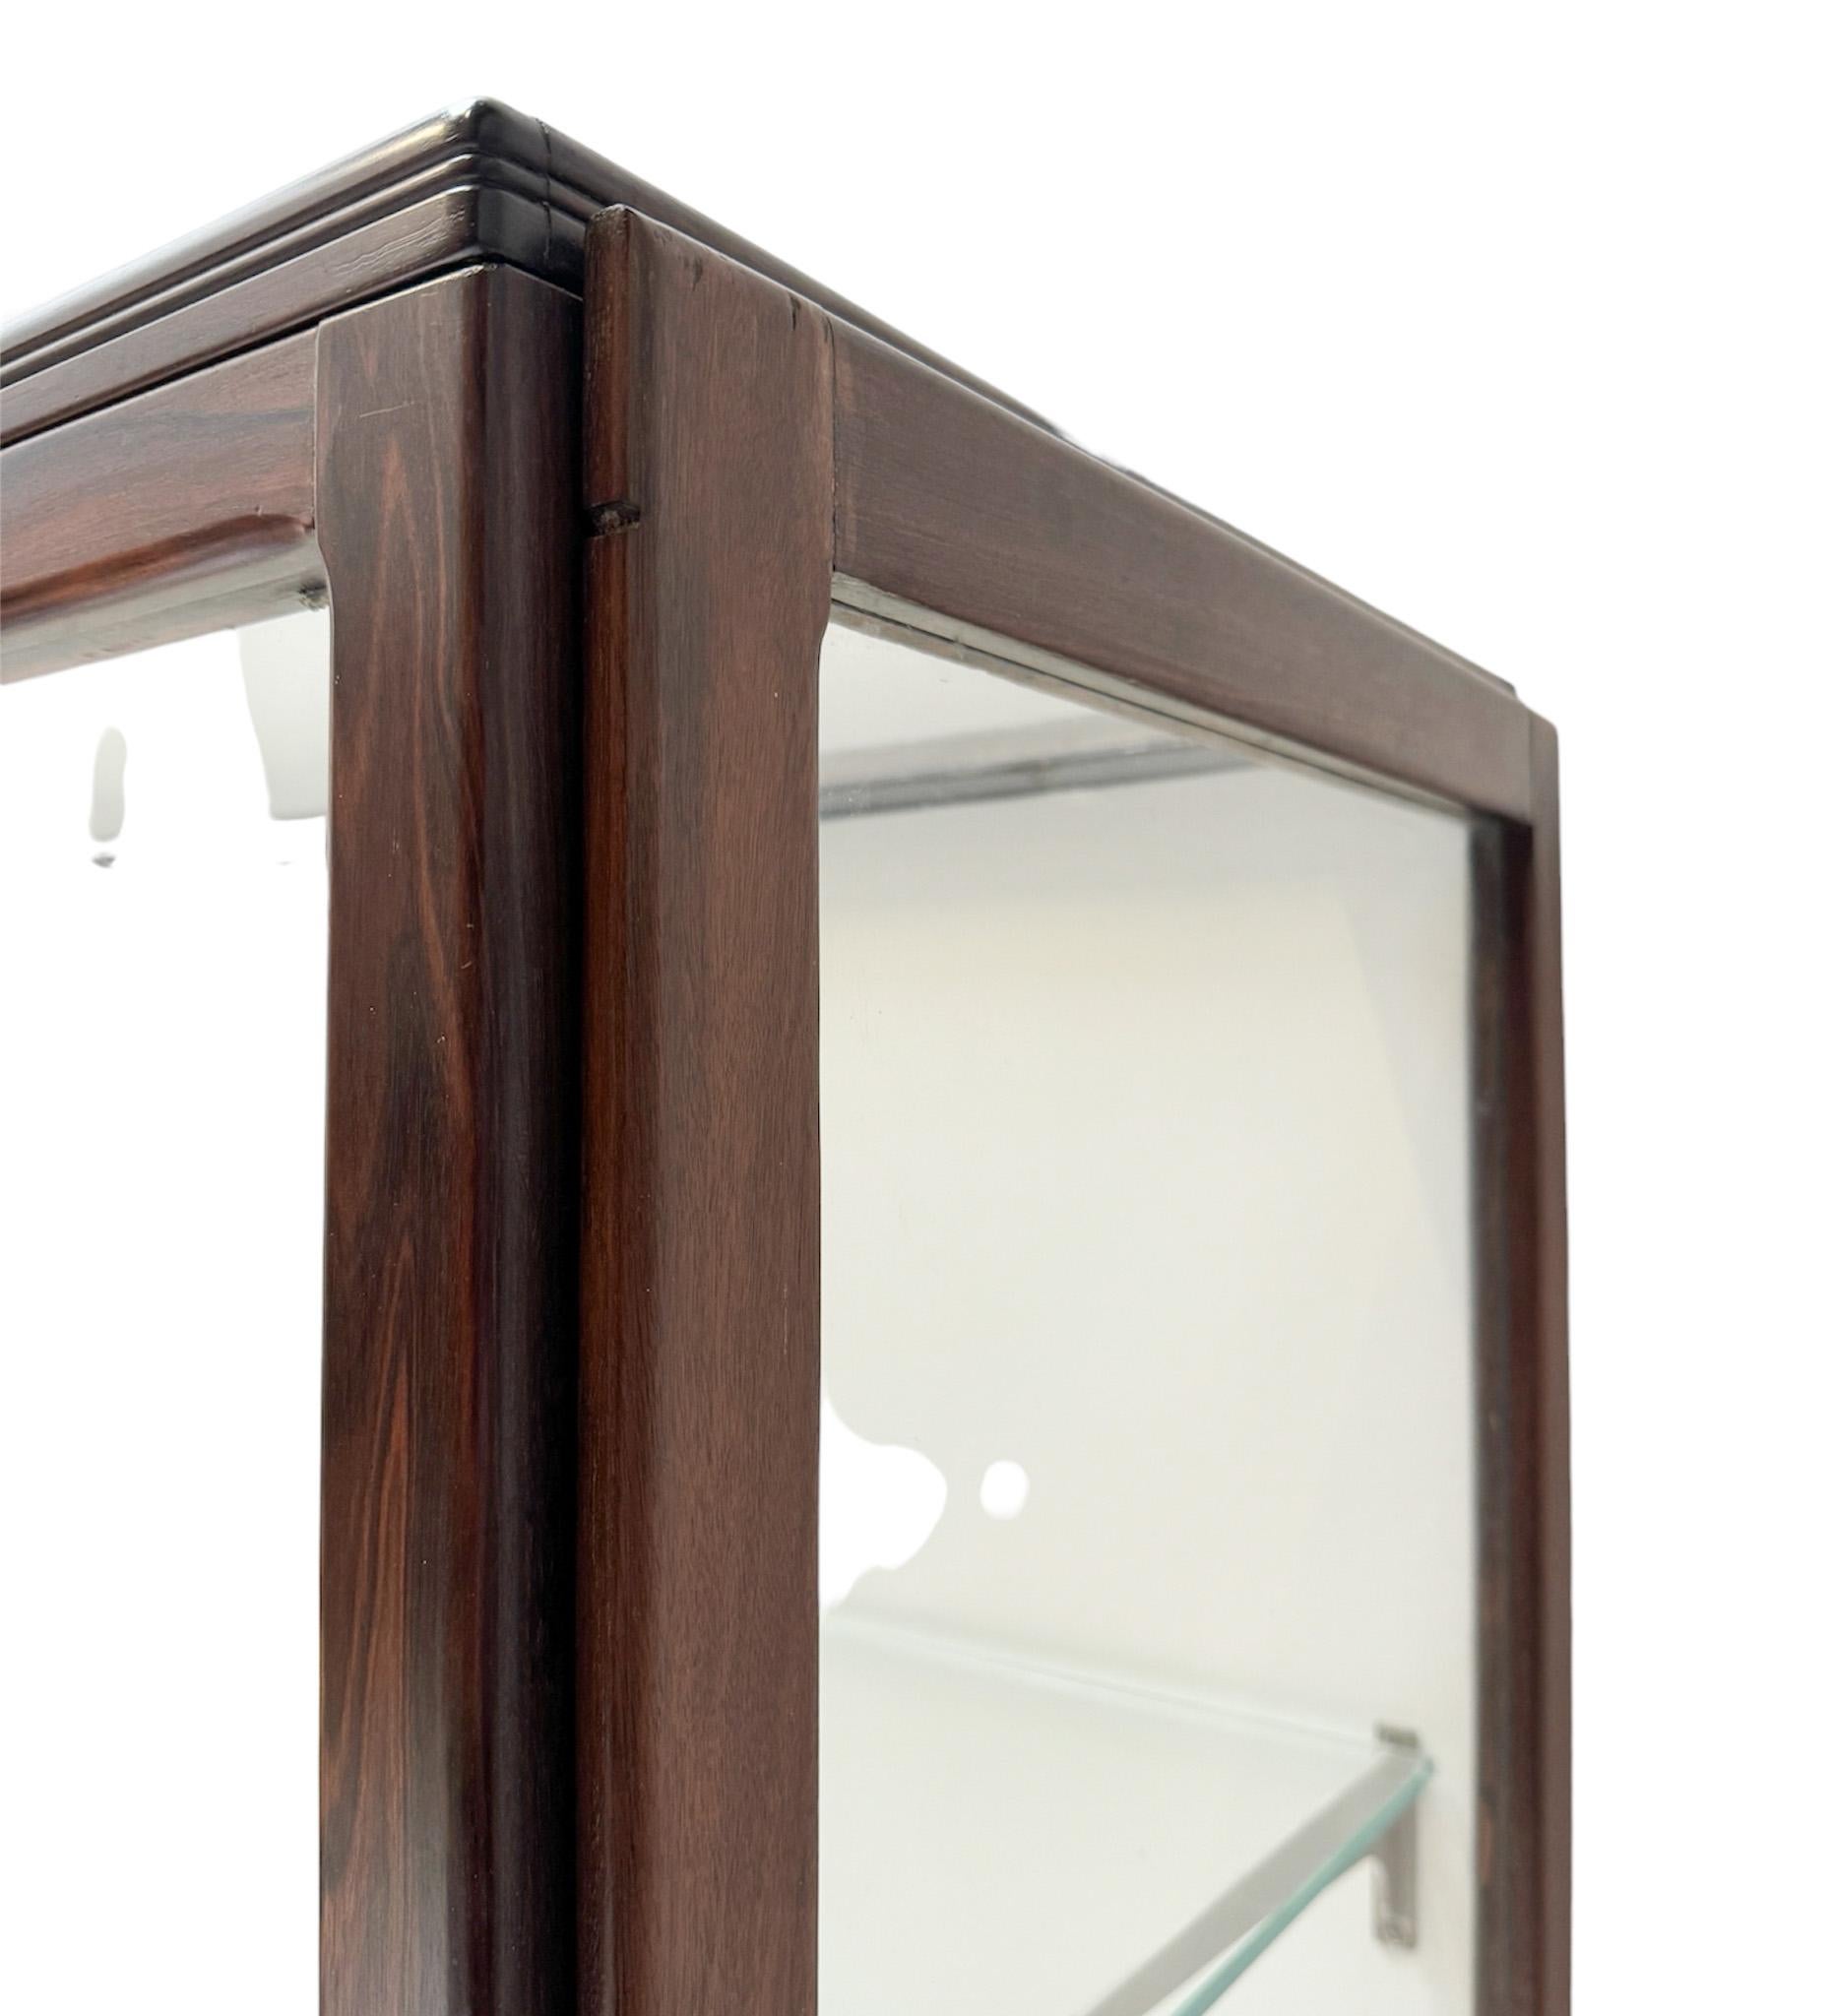 Macassar Art Deco Amsterdamse School Display Cabinet by Napoleon Le Grand, 1920s For Sale 4